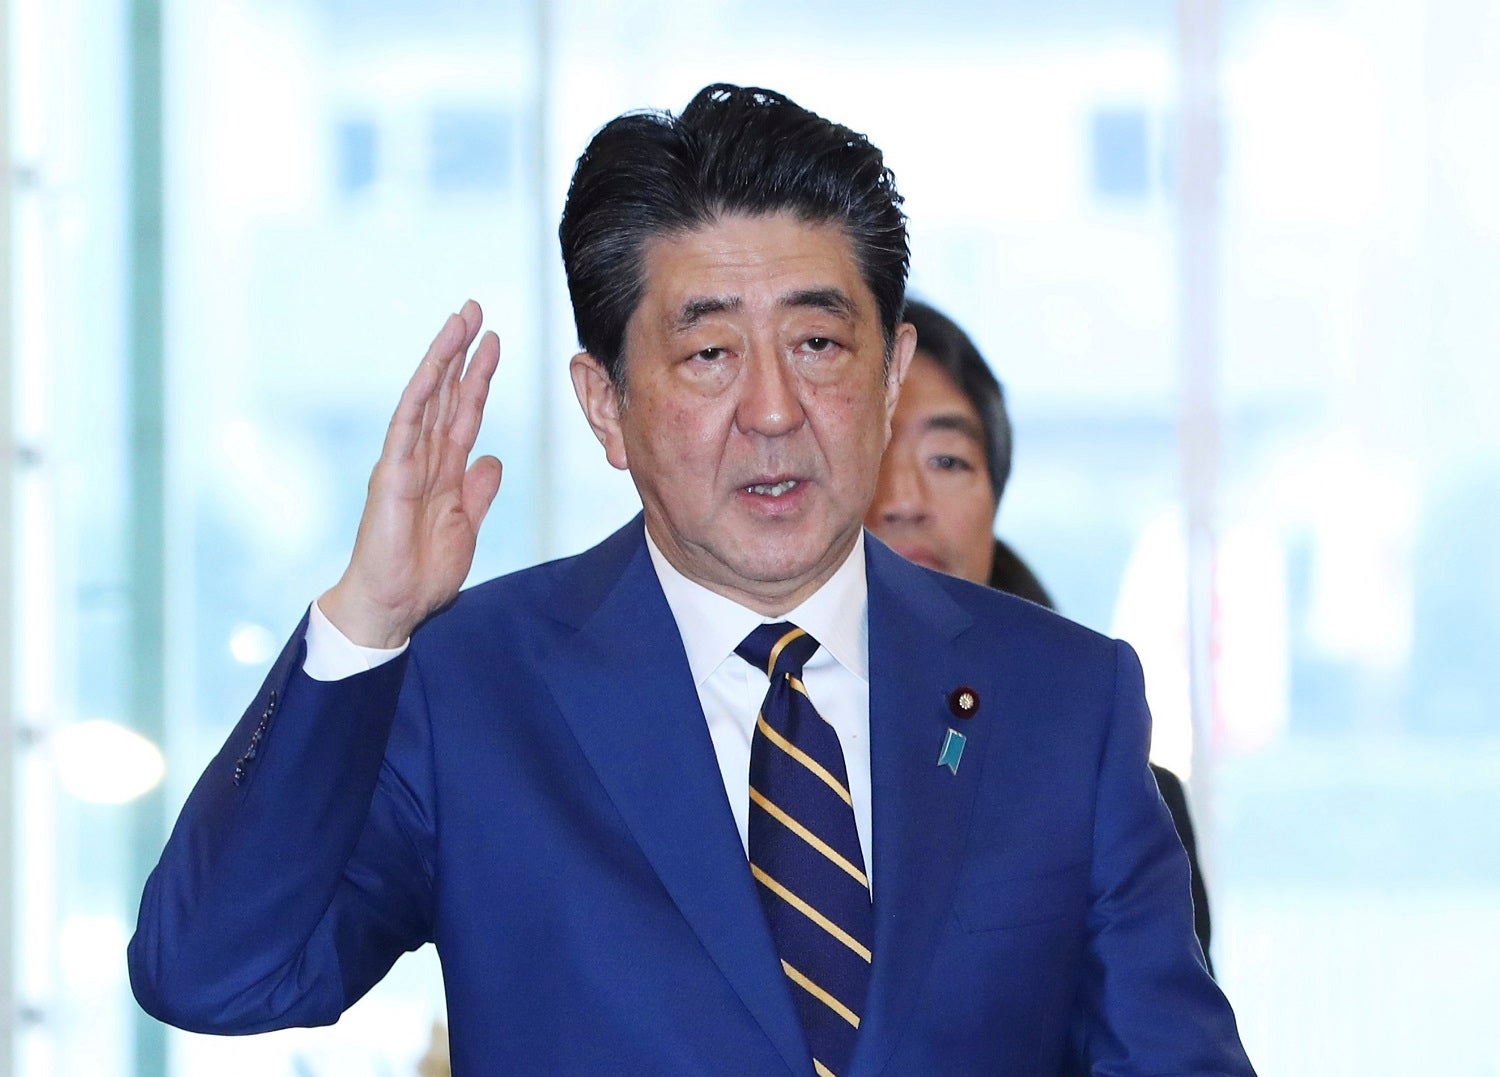 Japan's Prime Minister Shinzo Abe enters into the prime minister's office in Tokyo on January 20, 2020. House of Councilors Plenary session starts on the same day.